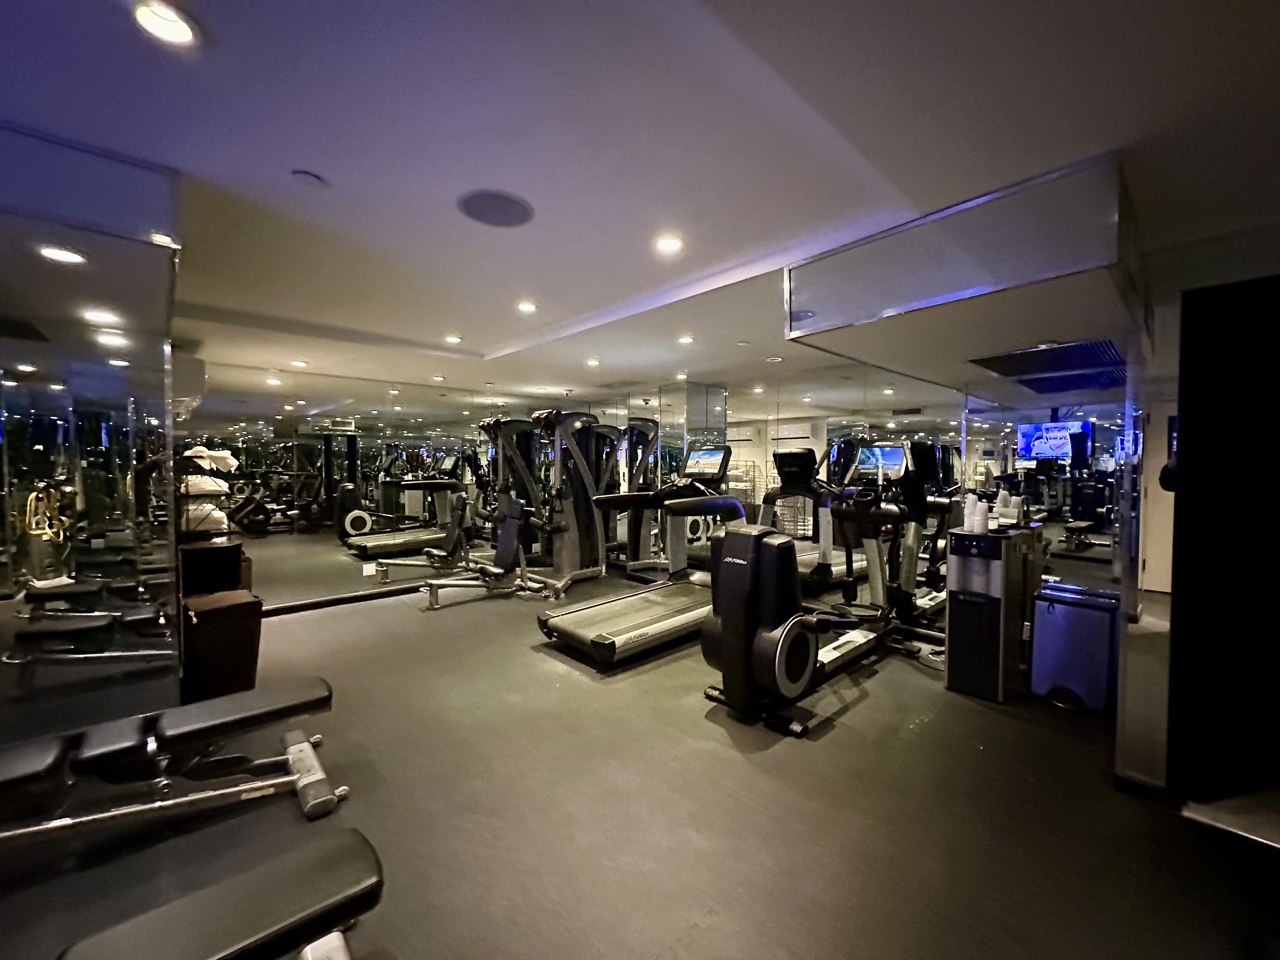 The Time Hotel New York fitness center wide